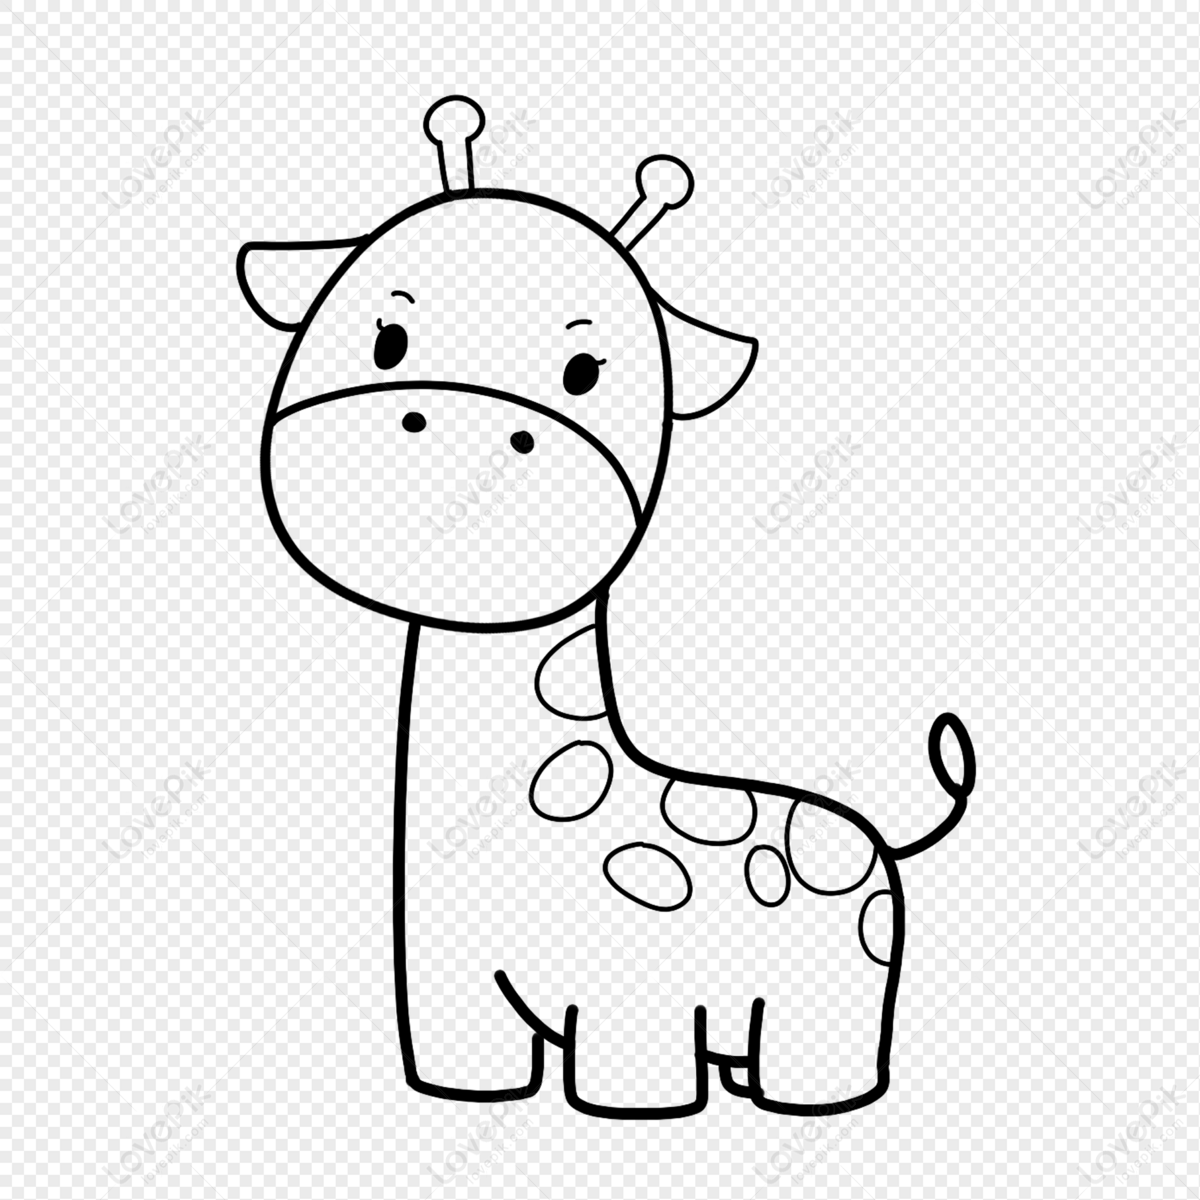 Giraffe Line Drawing PNG Picture And Clipart Image For Free Download -  Lovepik | 401690125